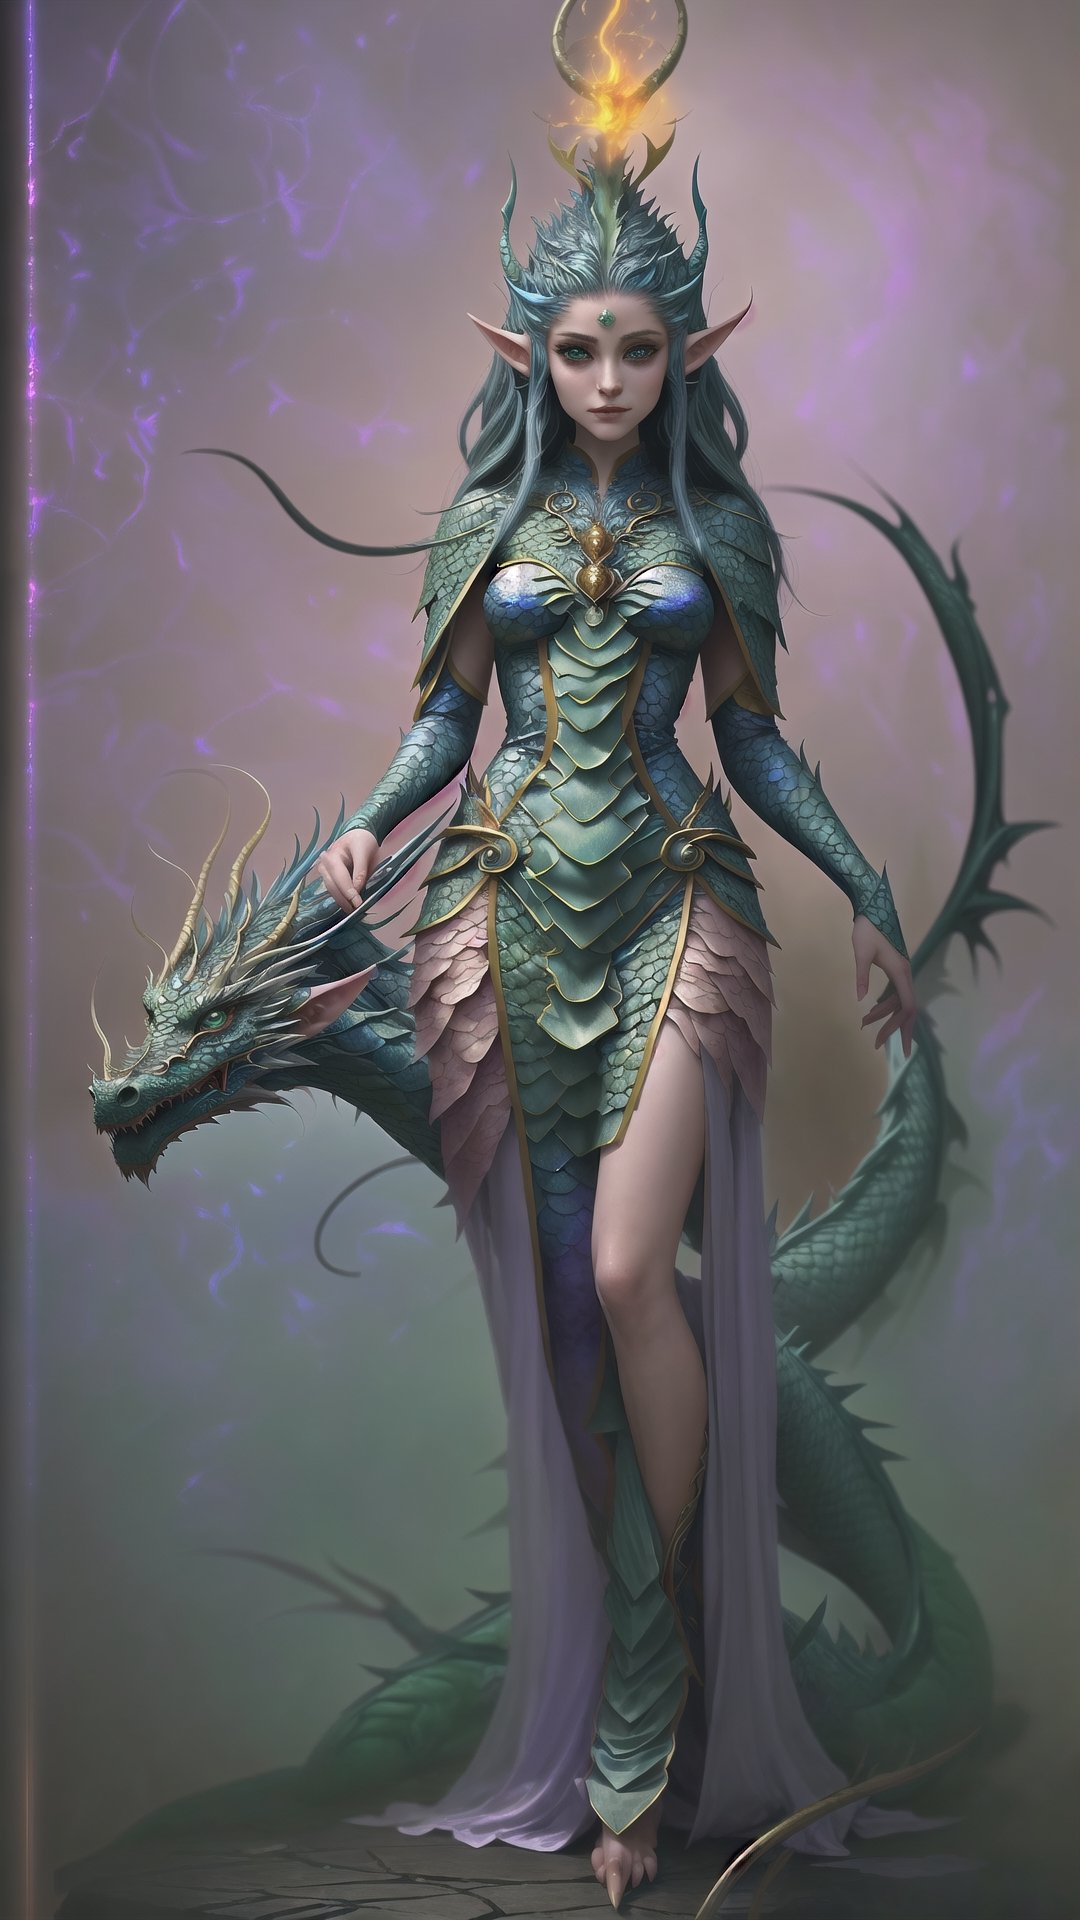 A mystical being, born of the union between a dragon and an elf,Dragon inspired dress,extraordinary creature exhibits both draconic and elven features, blending the elegance of the elves with the majestic presence of dragons. Its scales might shimmer with ethereal colors, and its pointed ears showcase the elven heritage. This hybrid being represents the harmonious fusion of two fantastical worlds, embodying a unique and captivating presence, dragonx2